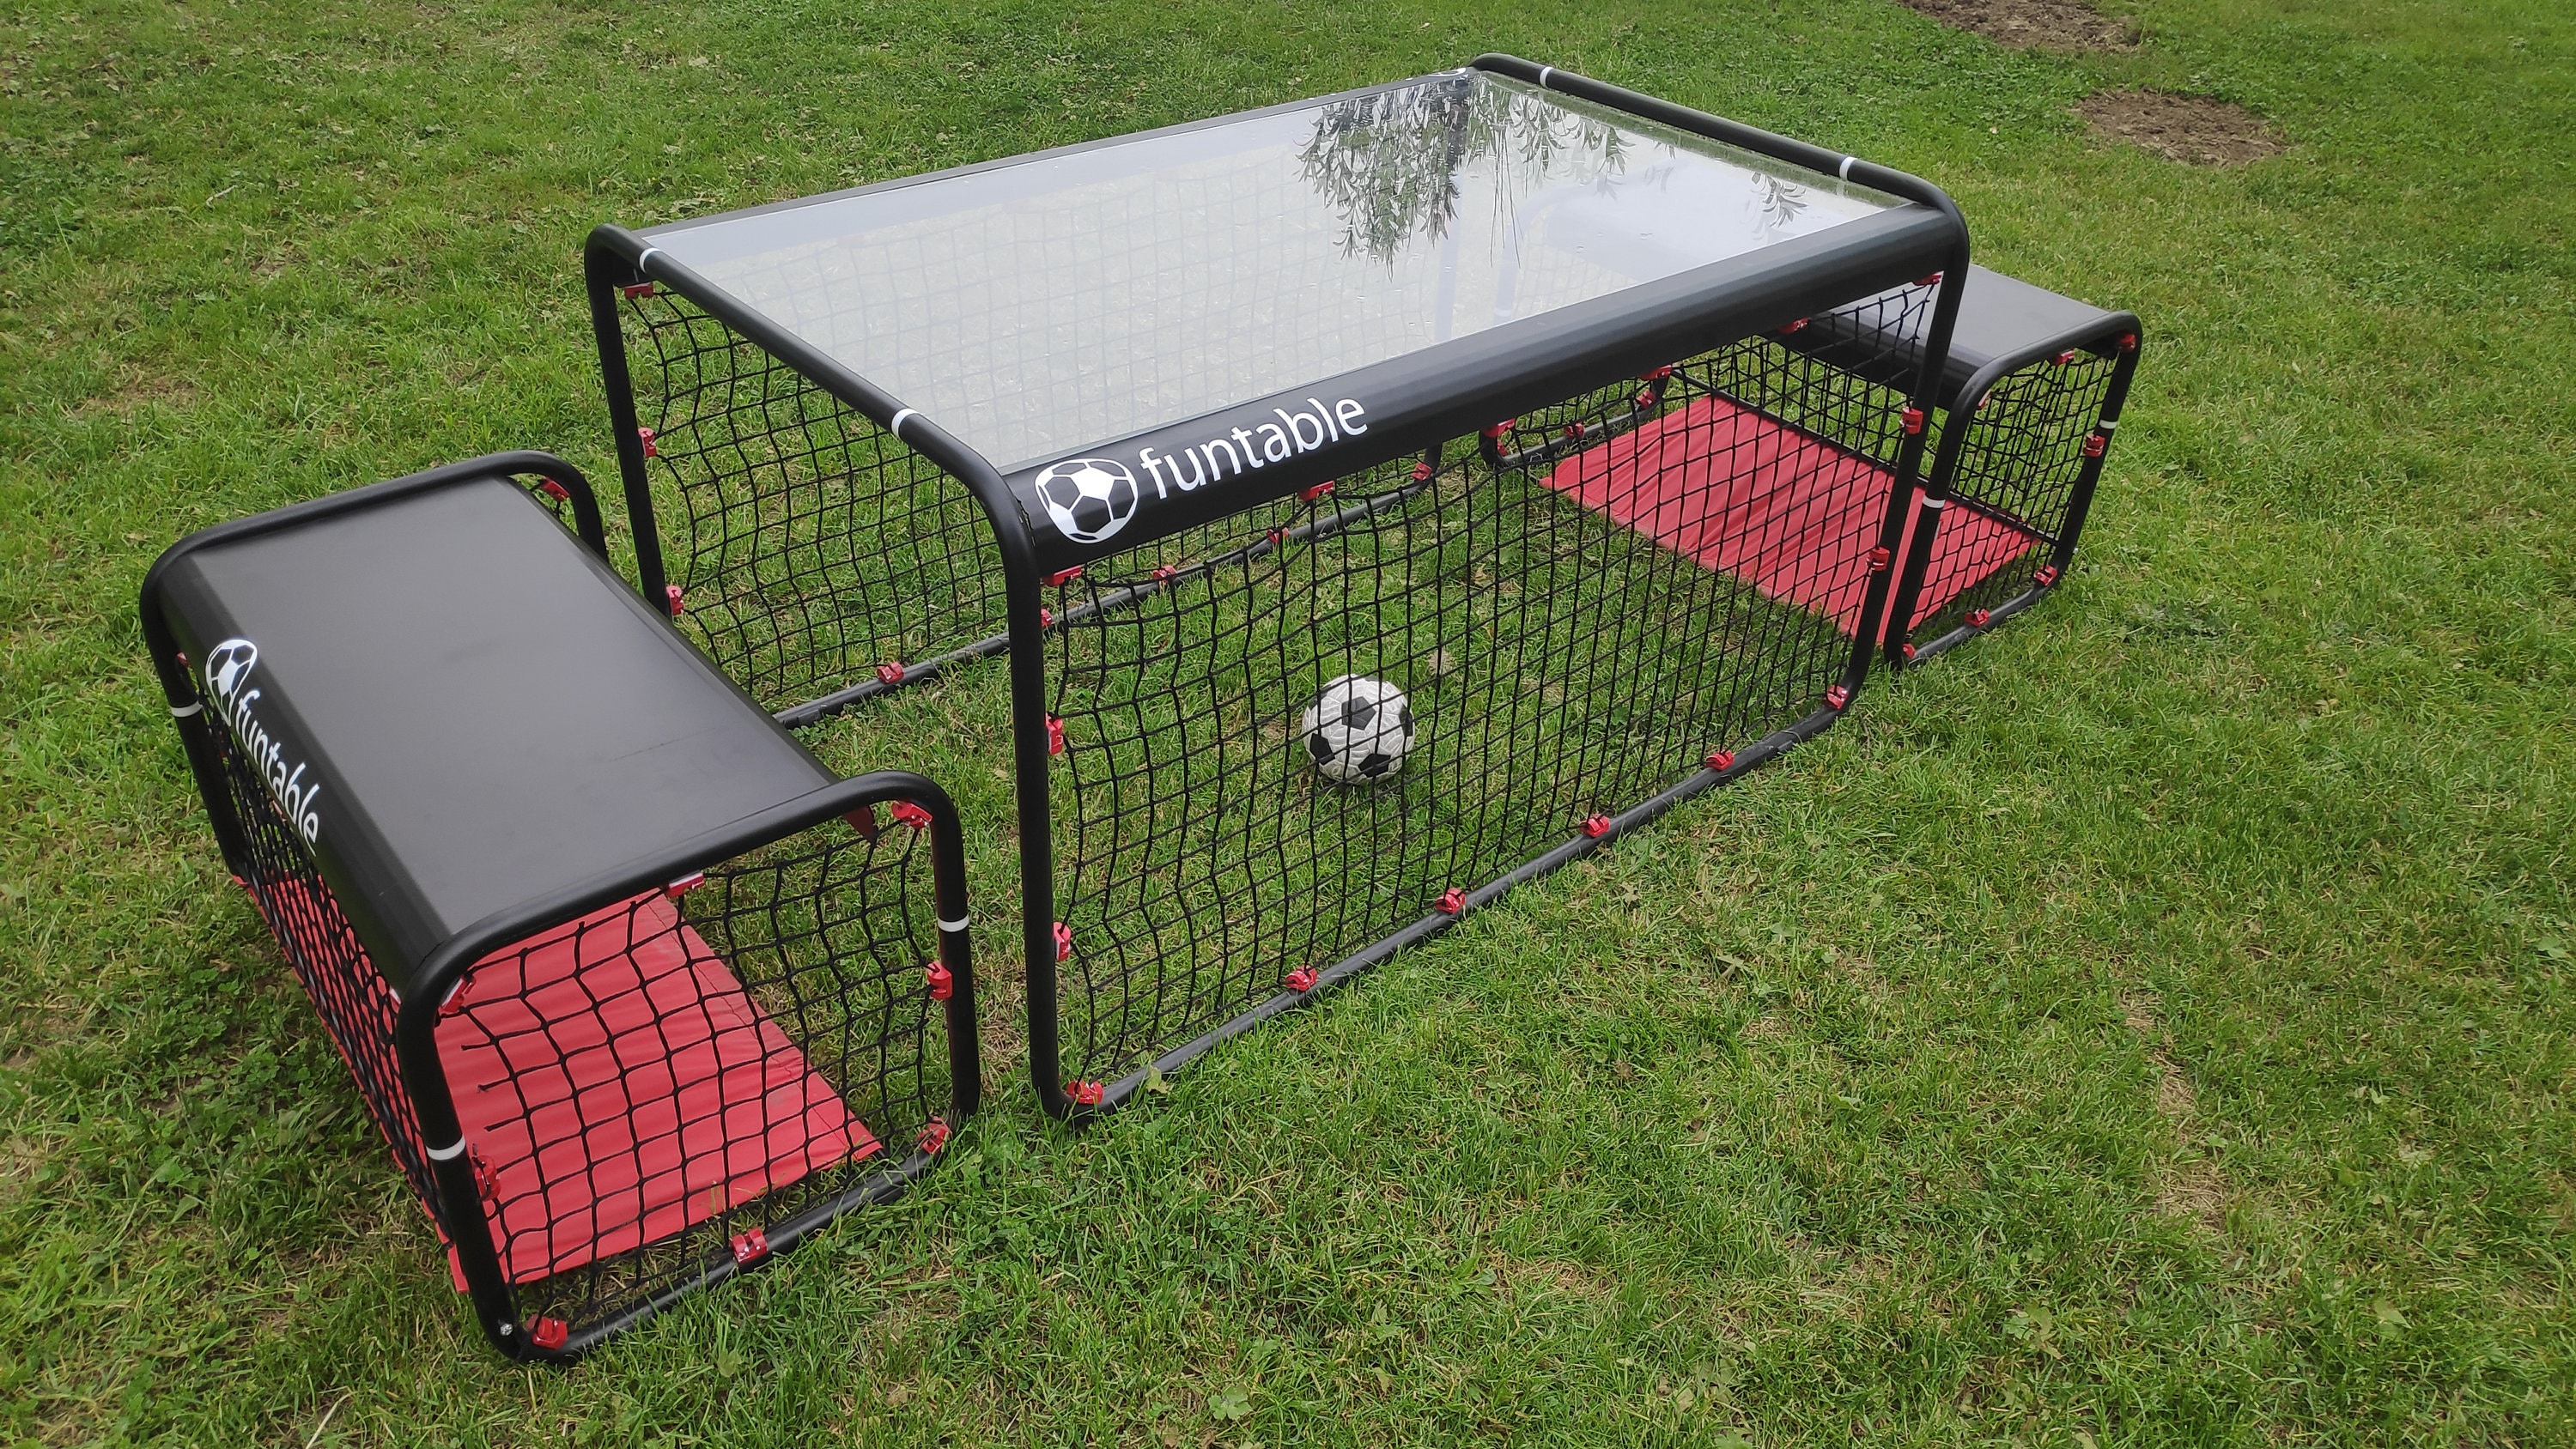  Brrnoo Soccer Game Table, 6 Sticks 2 Players Football Table  Desktop Kicker Game for Dormitory for Home : Everything Else